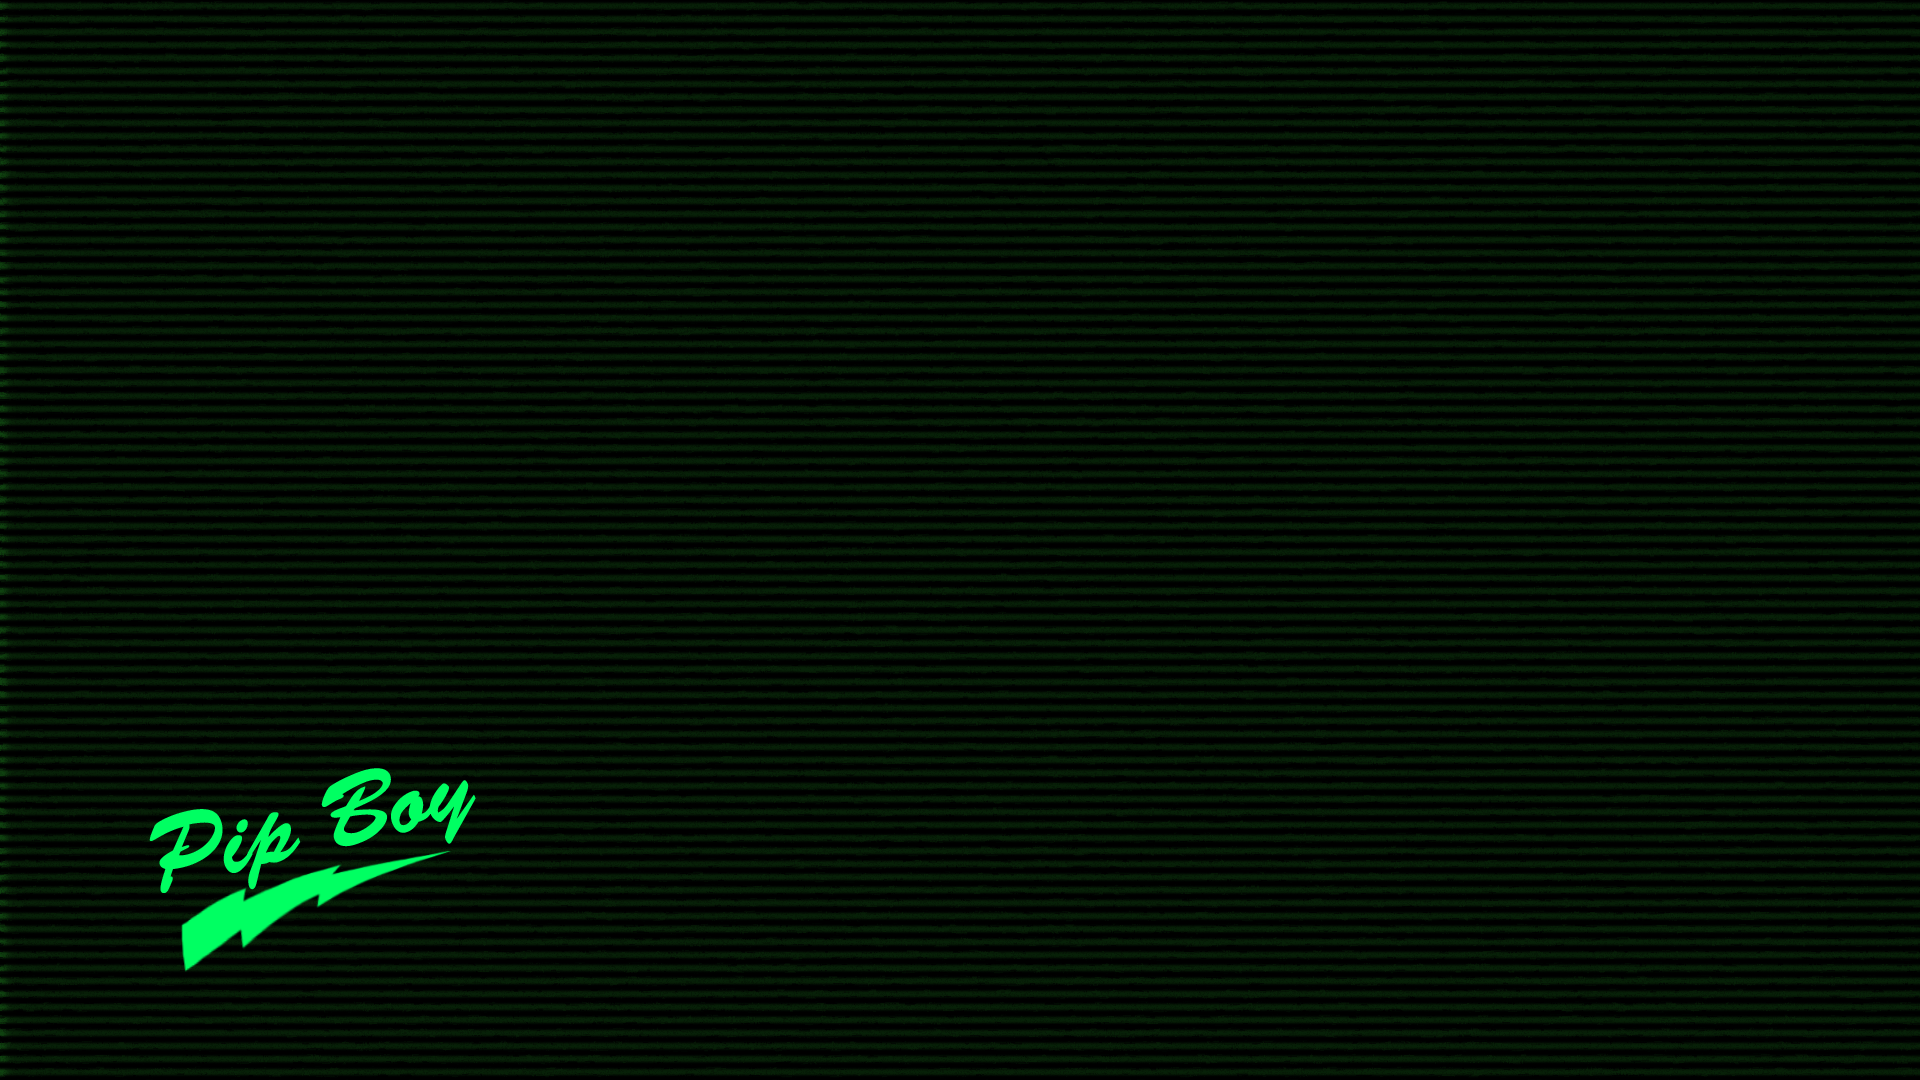 Free Download Wallpaper Other Fallout 3 Work In Progress Of A Pip Boy Wallpaper I 19x1080 For Your Desktop Mobile Tablet Explore 43 Pipboy 3000 Wallpaper Pipboy 3000 Wallpaper